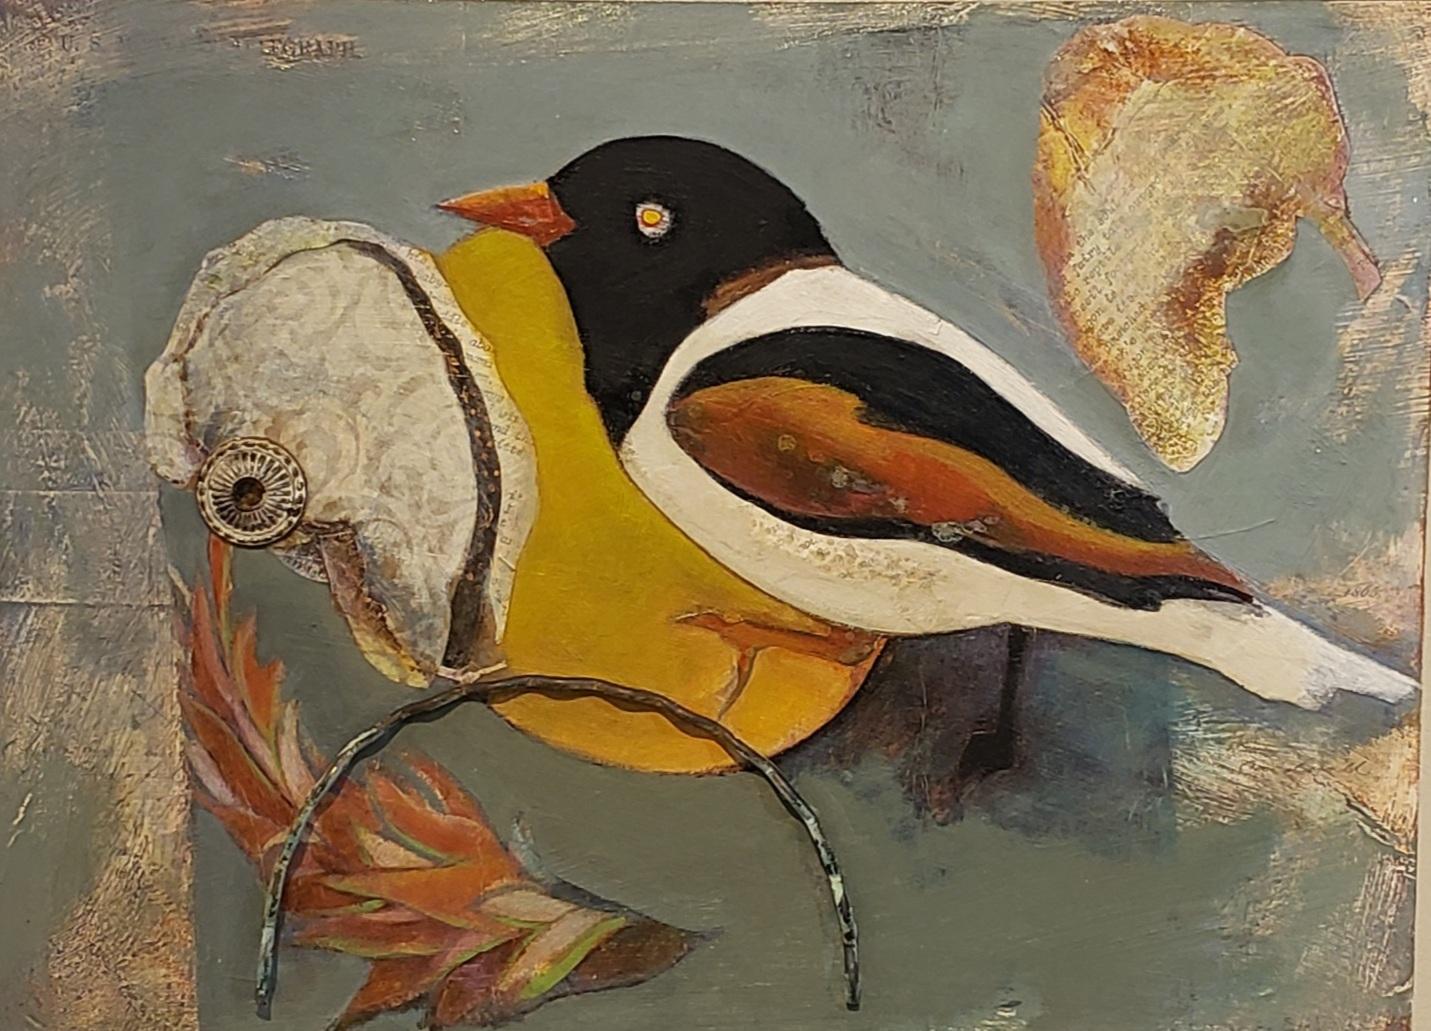 Perched is by Anne Embree who is known for her whimsical animal paintings . Perched focuses on the Bird and the surrounding objects Perched  is 16 x 20 unframed and 21 x 25 framed. Anne Embree was born in 1946 and passed in 2013.  Anne Embree (Born